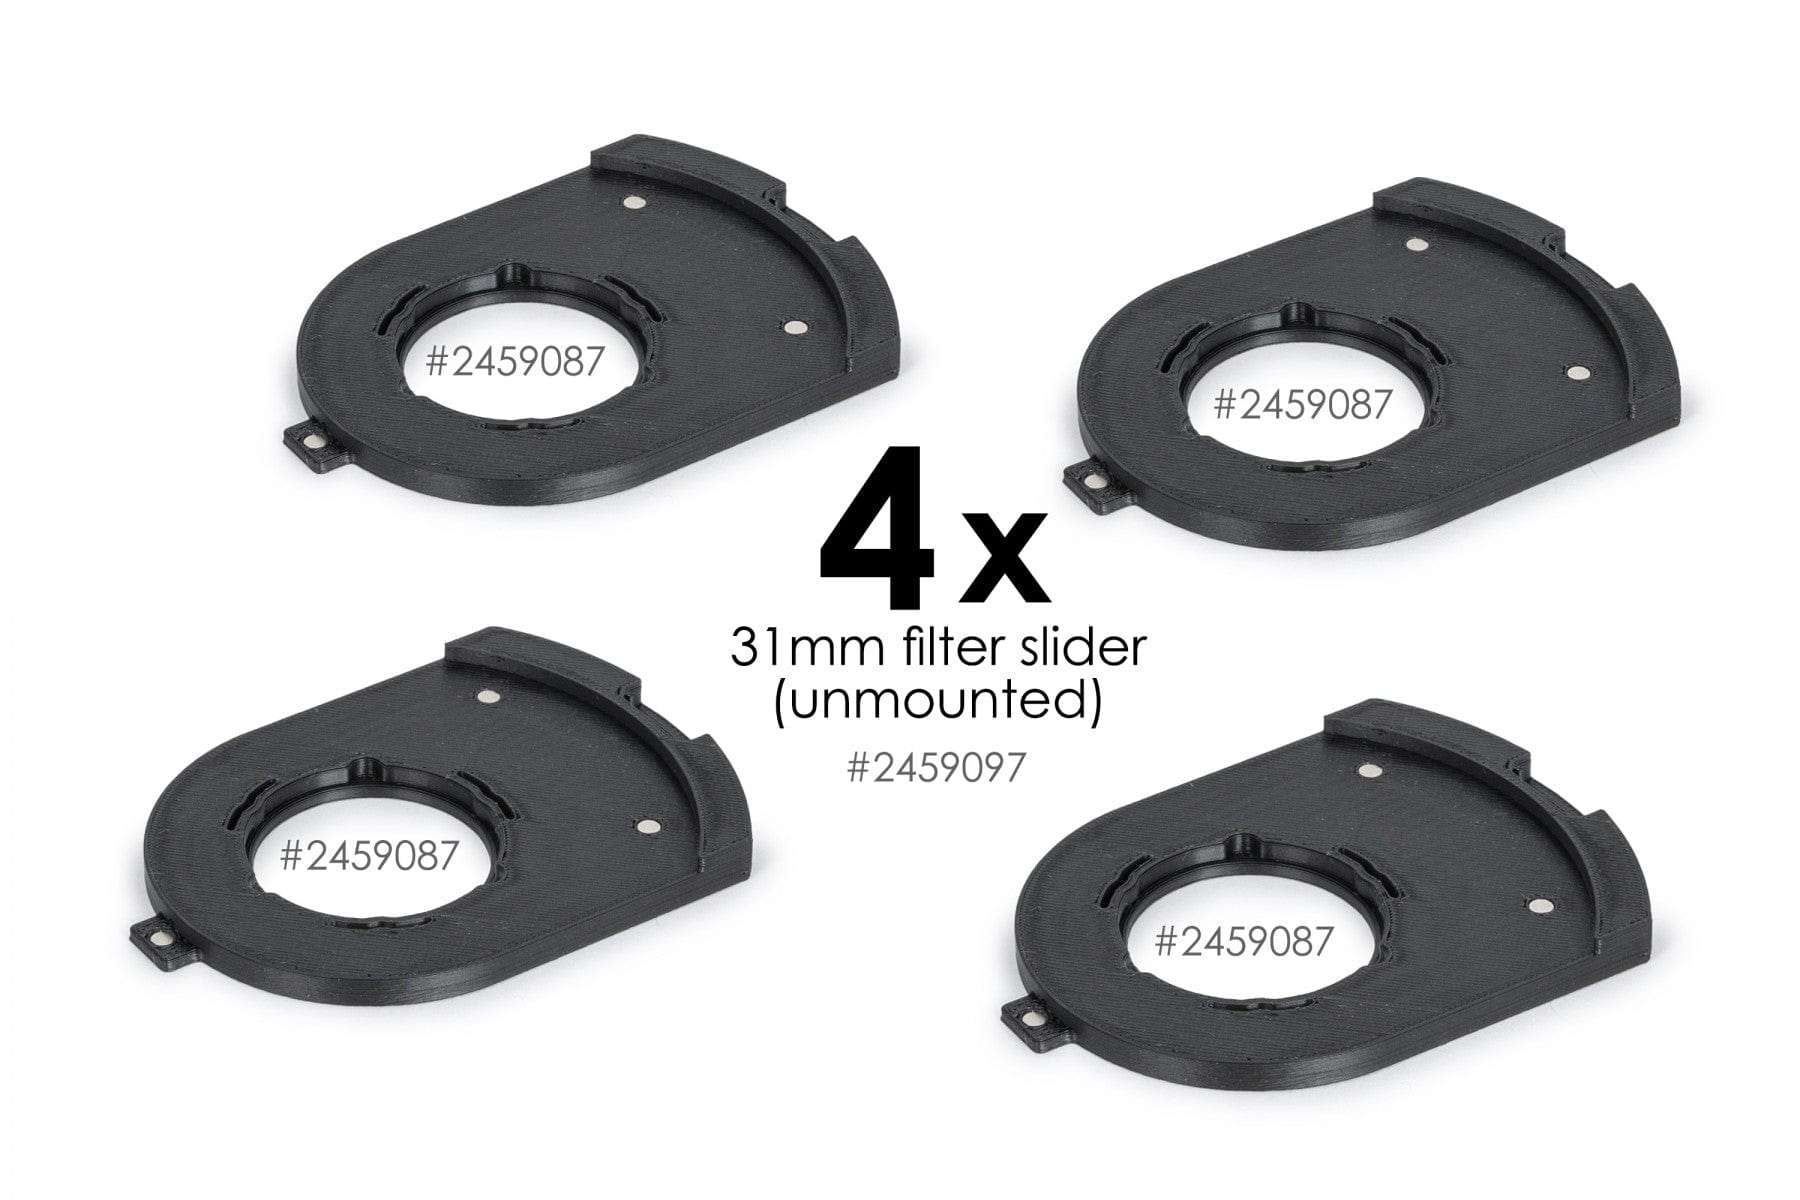 Baader Planetarium Accessory 4x Filterholder 31mm for FCCT (3D-printed) for unmounted Ø 31x2mm Baader Filter